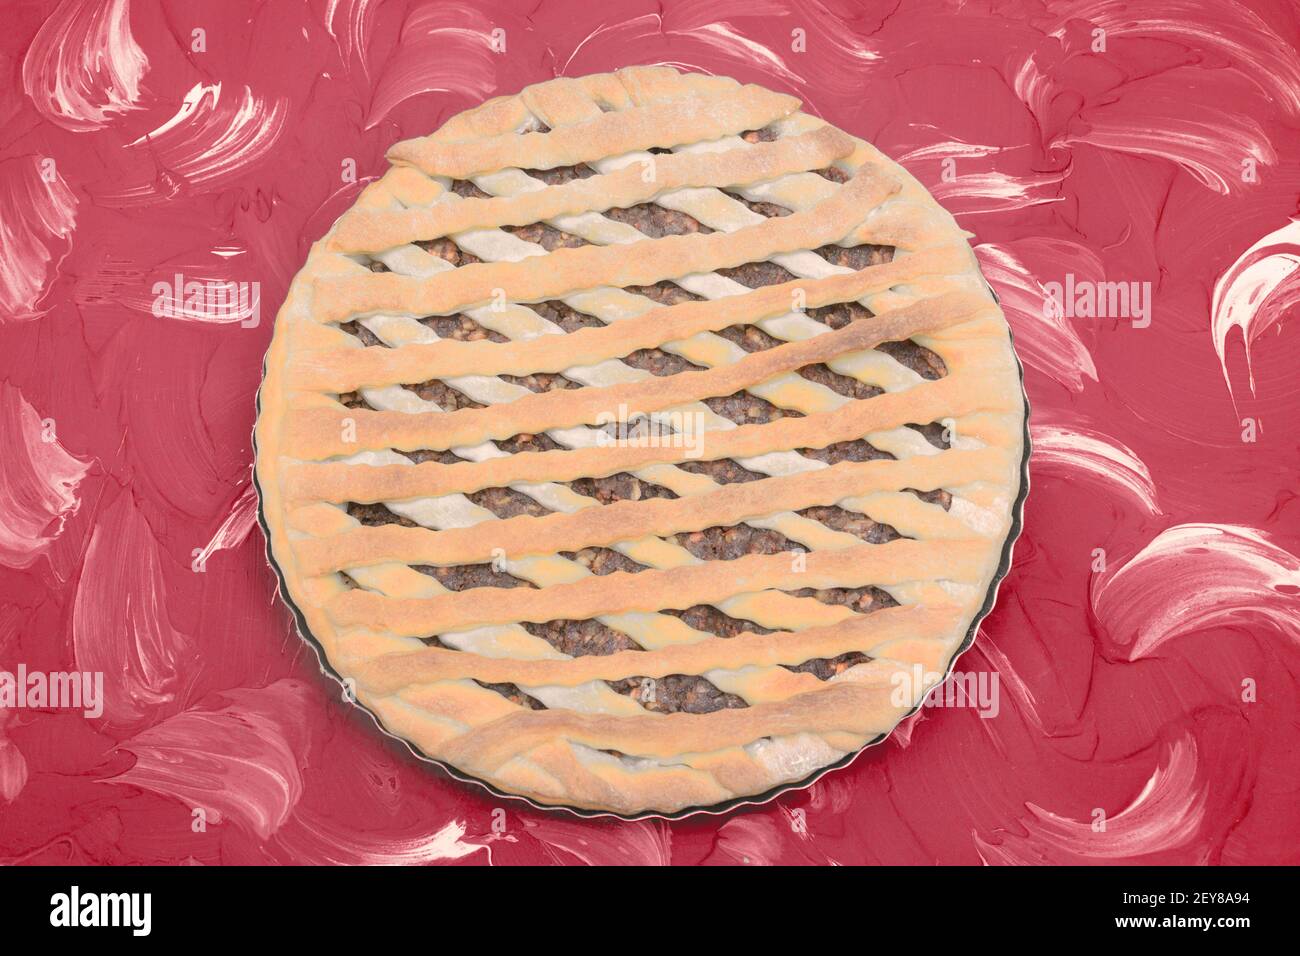 Homemade pie with sweet fruit filling. Baking close-up, top view. Stock Photo